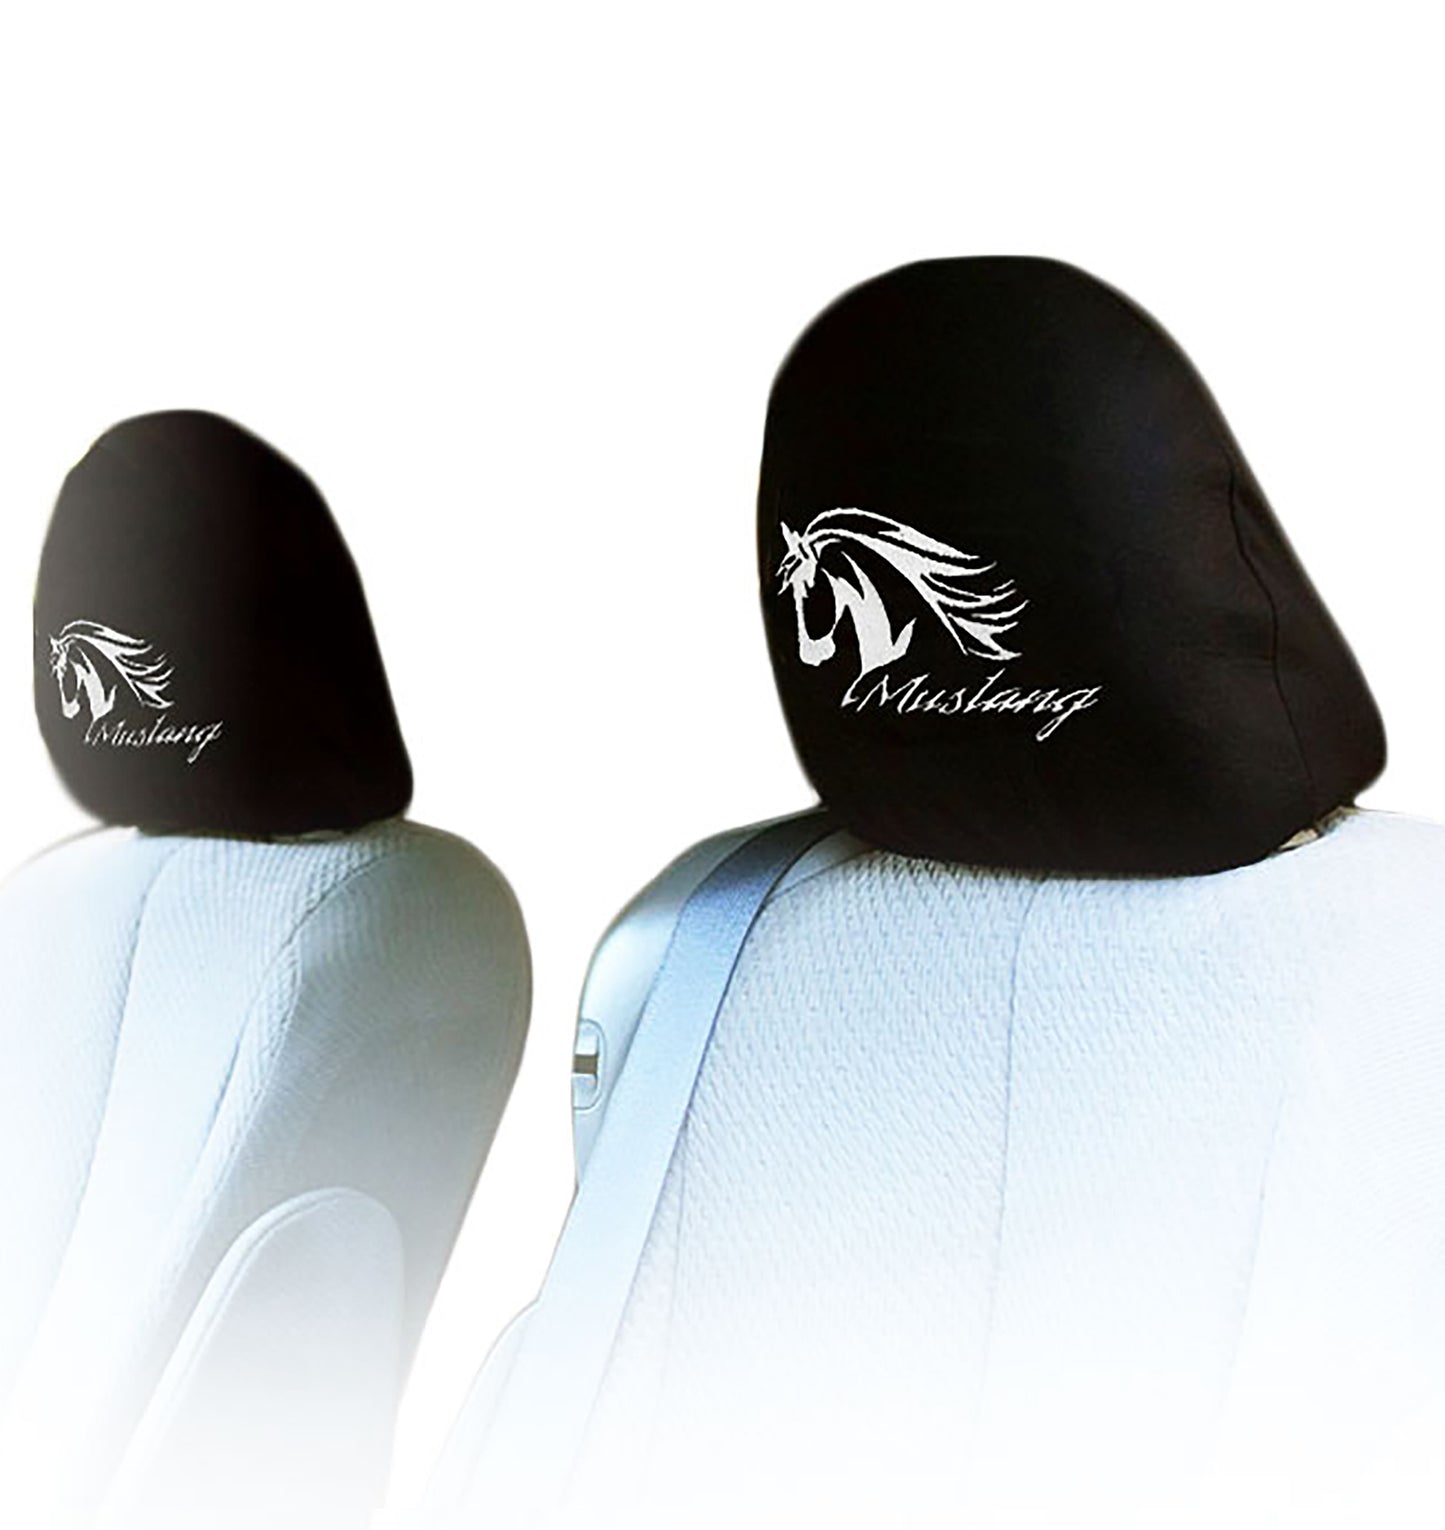 Embroidery Mustang Logo Design Auto Truck SUV Car Seat Headrest Cover Accessory 1 Pair - Yupbizauto